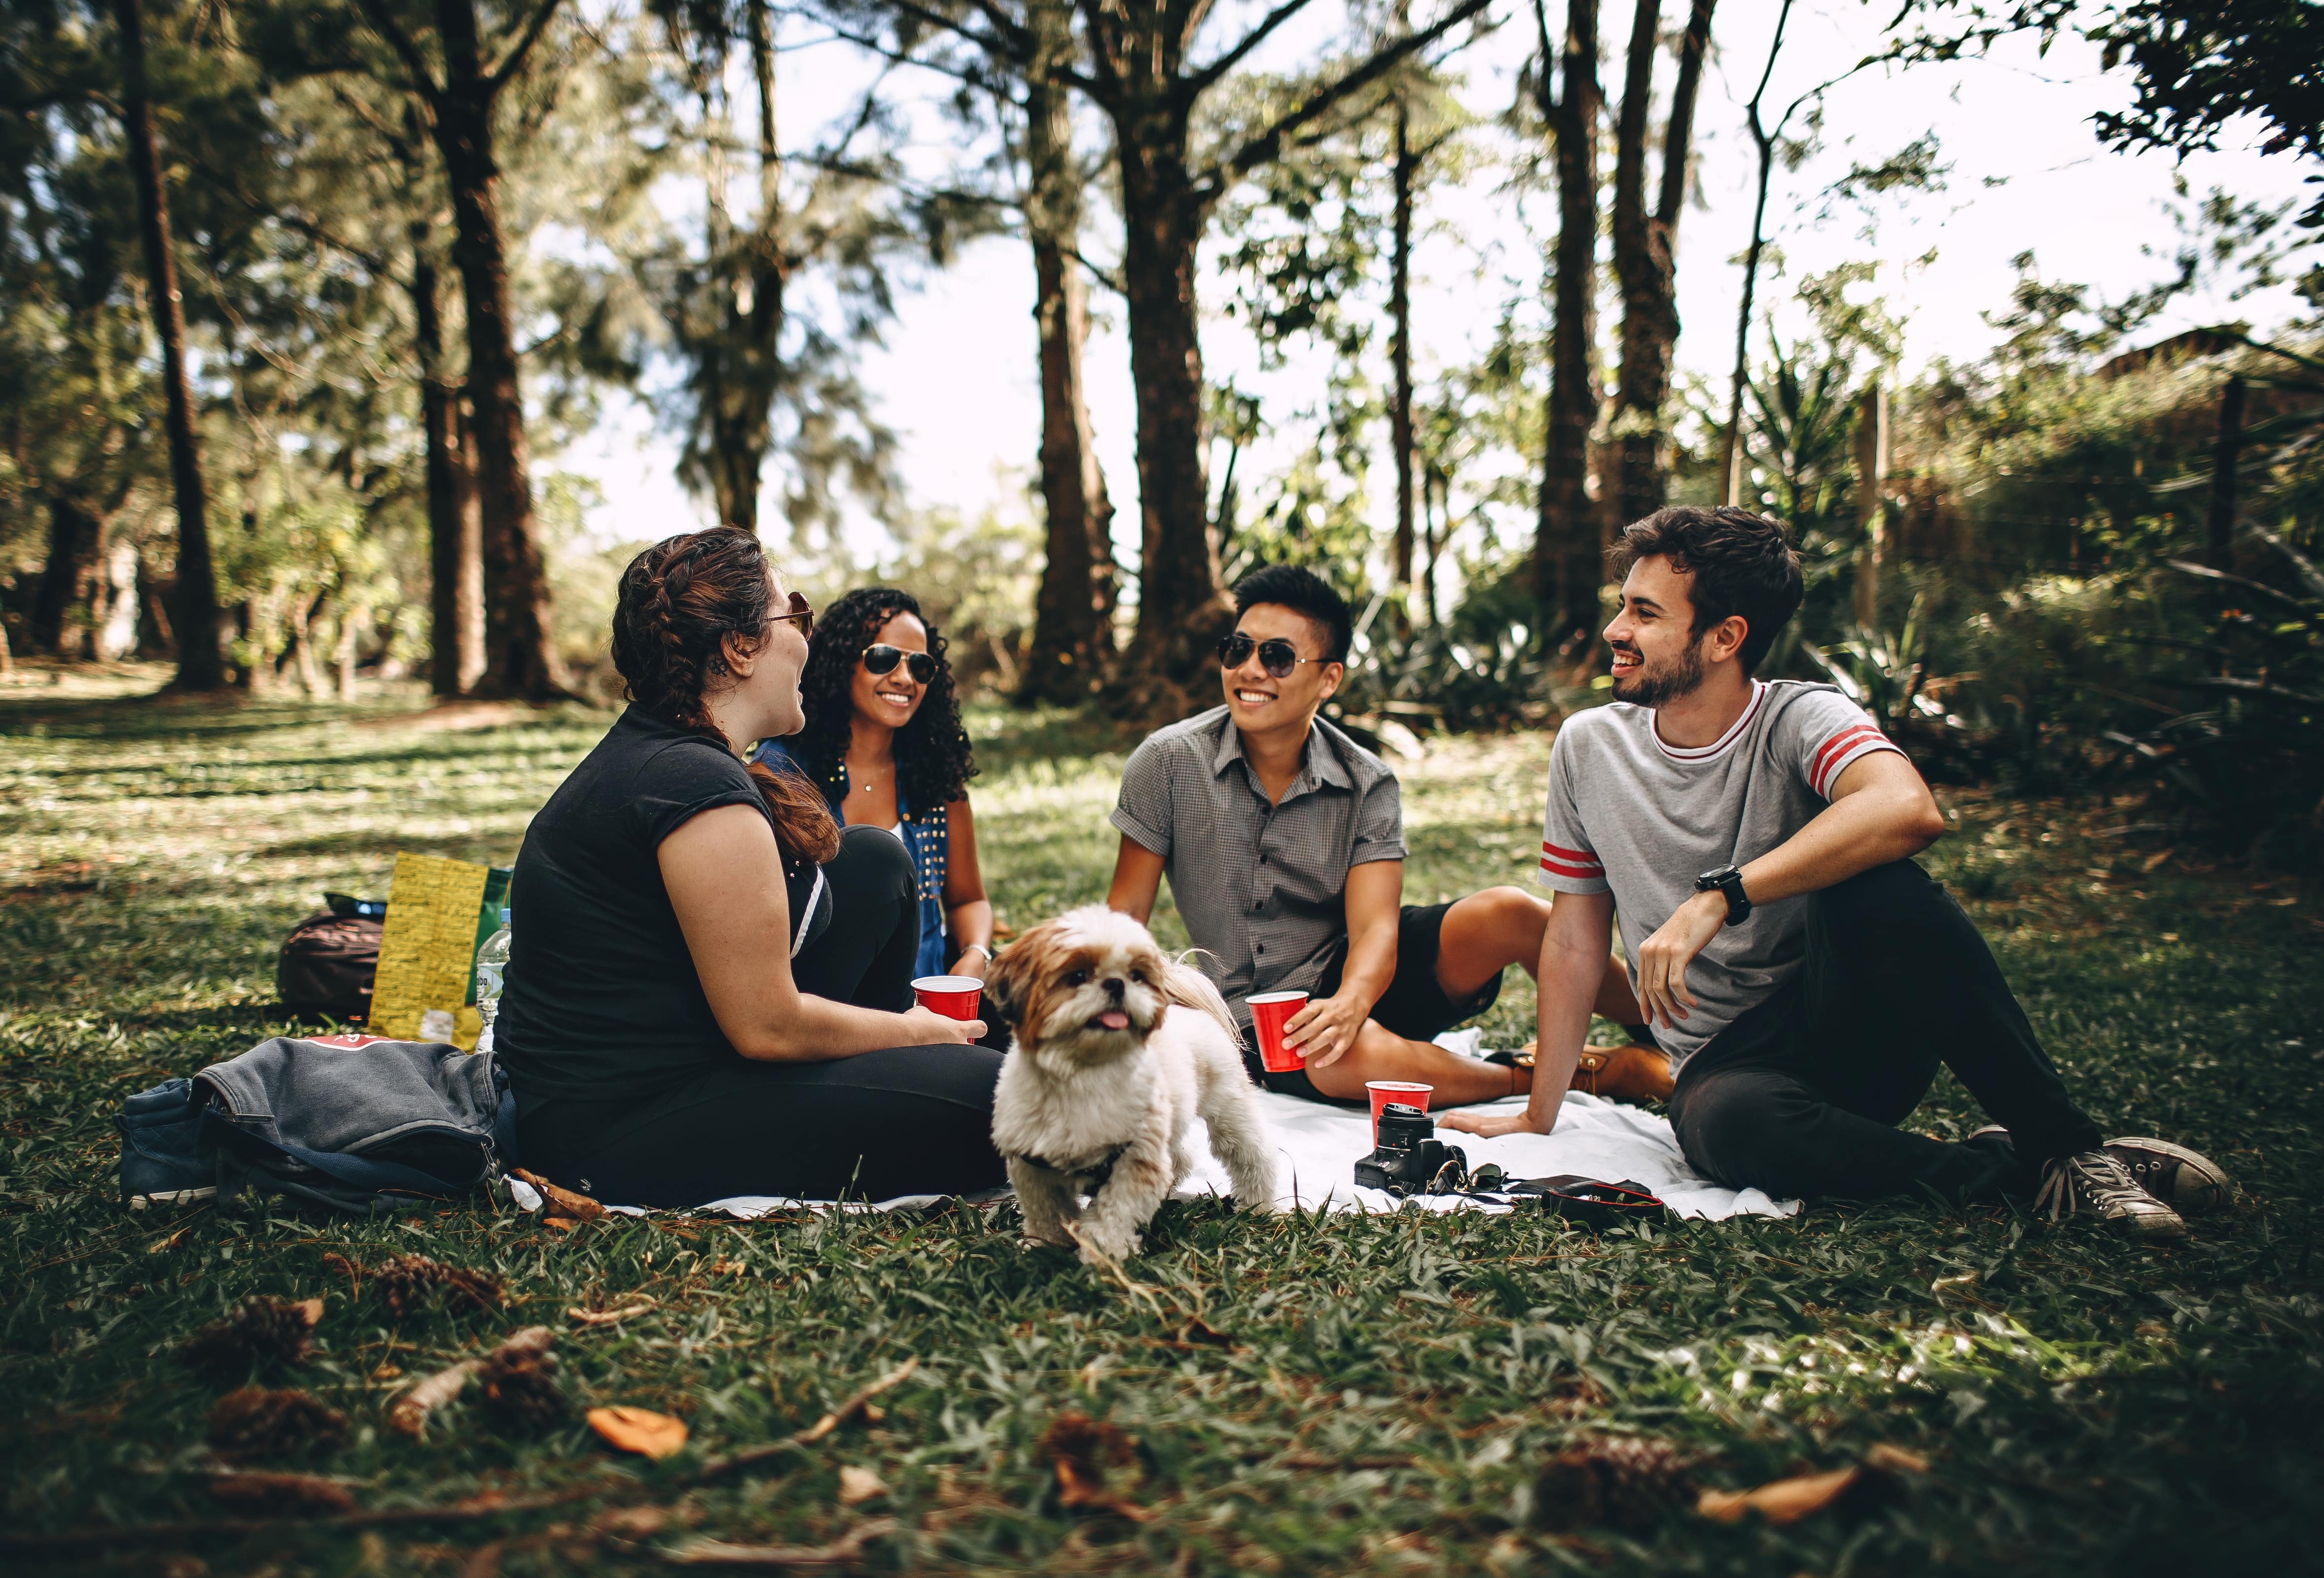 Stock image - People/teenagers/young friends and dog having a picnic - Pets holiday - Photo by Helena Lopes from Pexels